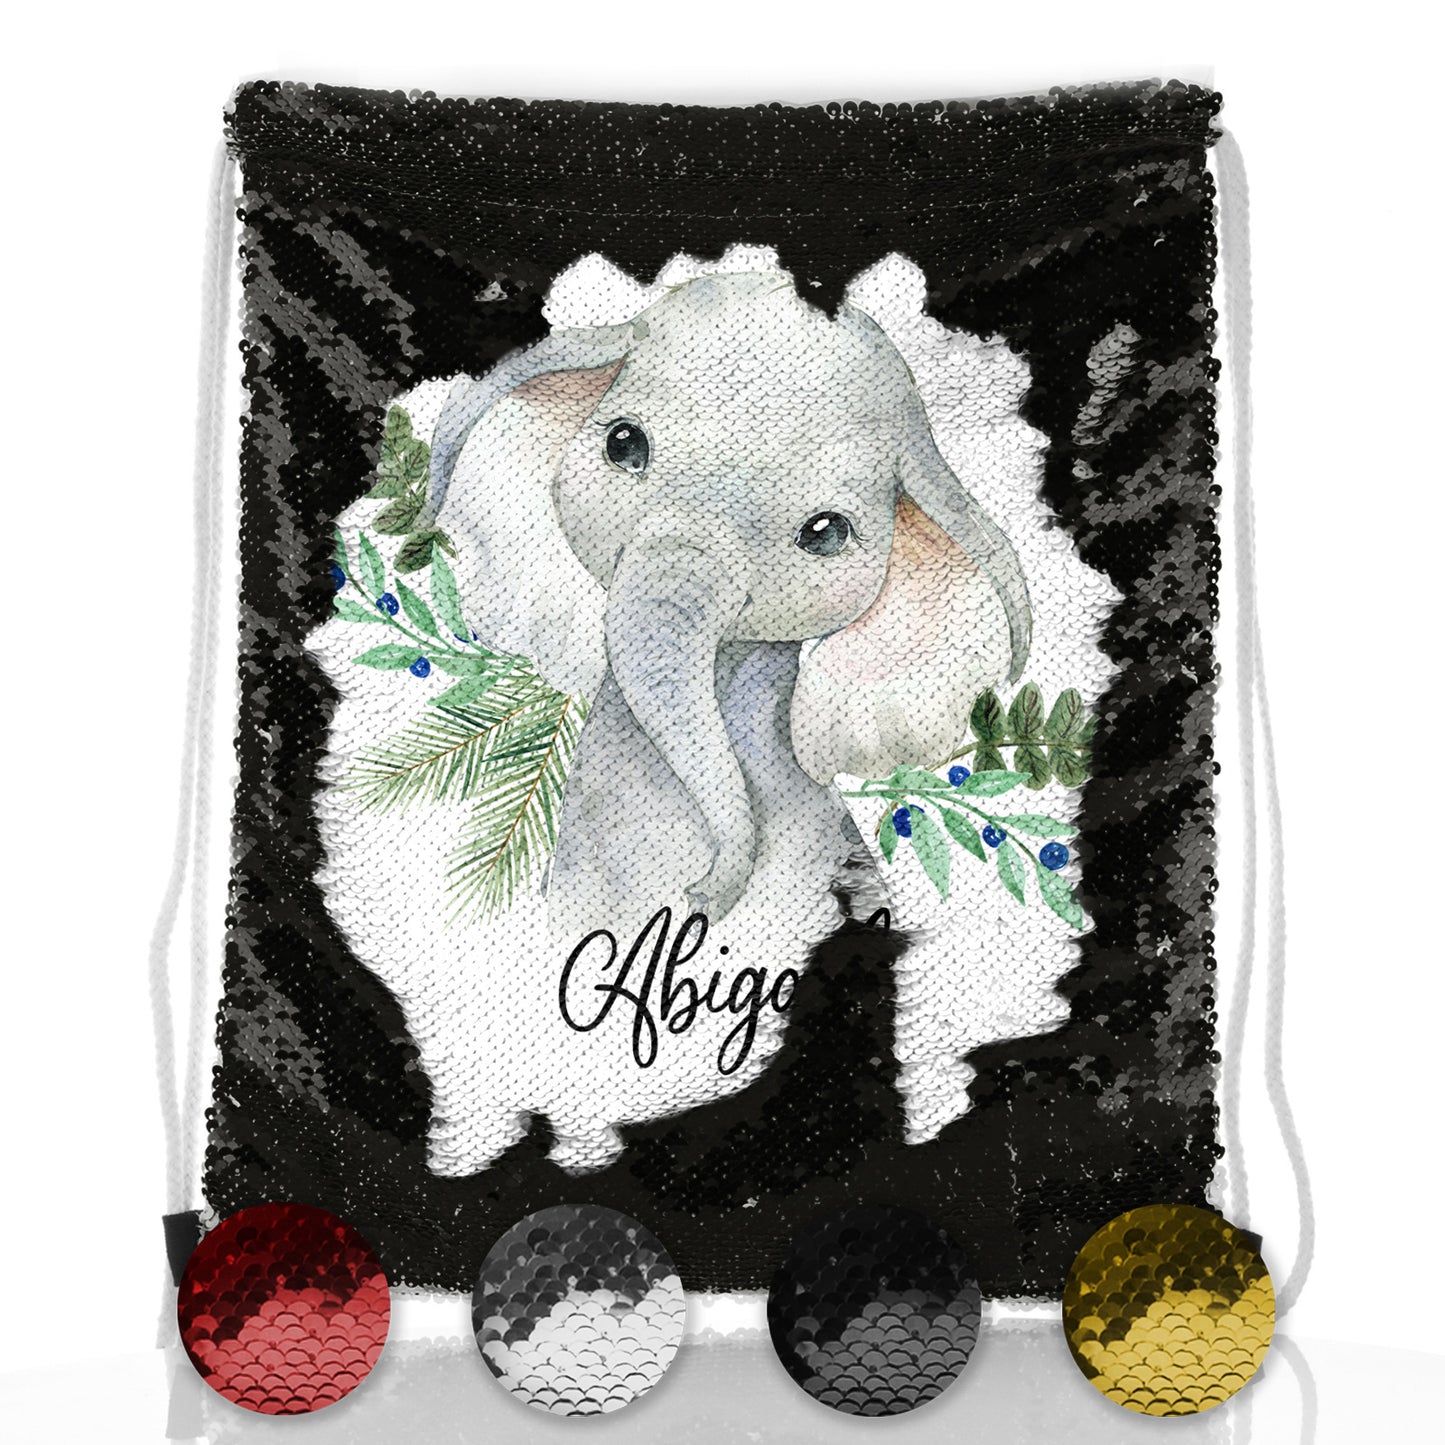 Personalised Sequin Drawstring Backpack with Elephant Blue Berries and Cute Text